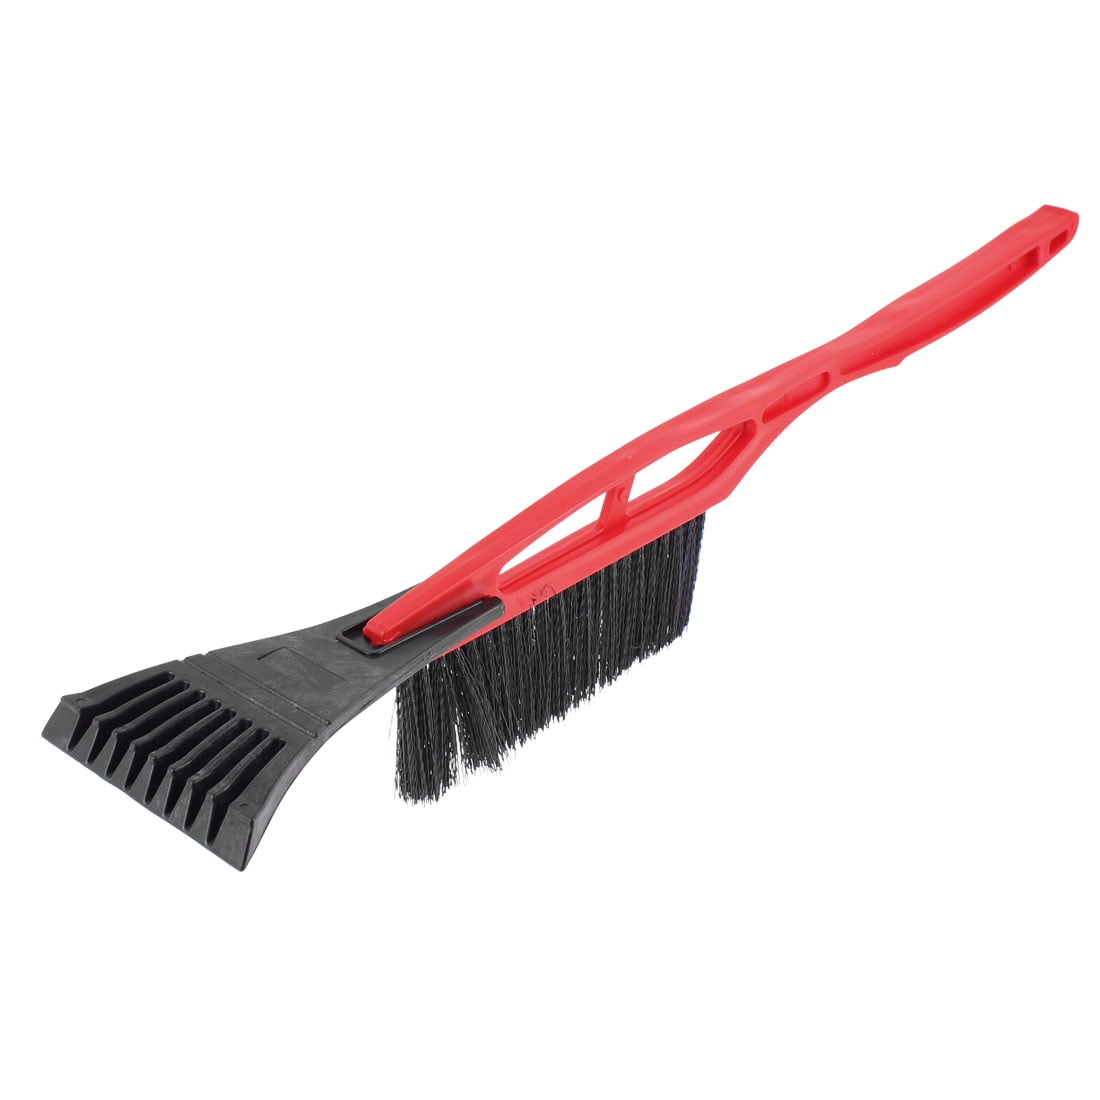 Snow Remover Ice Scraper Car Windshield Windows Scrapper Tool With Mitts Red 